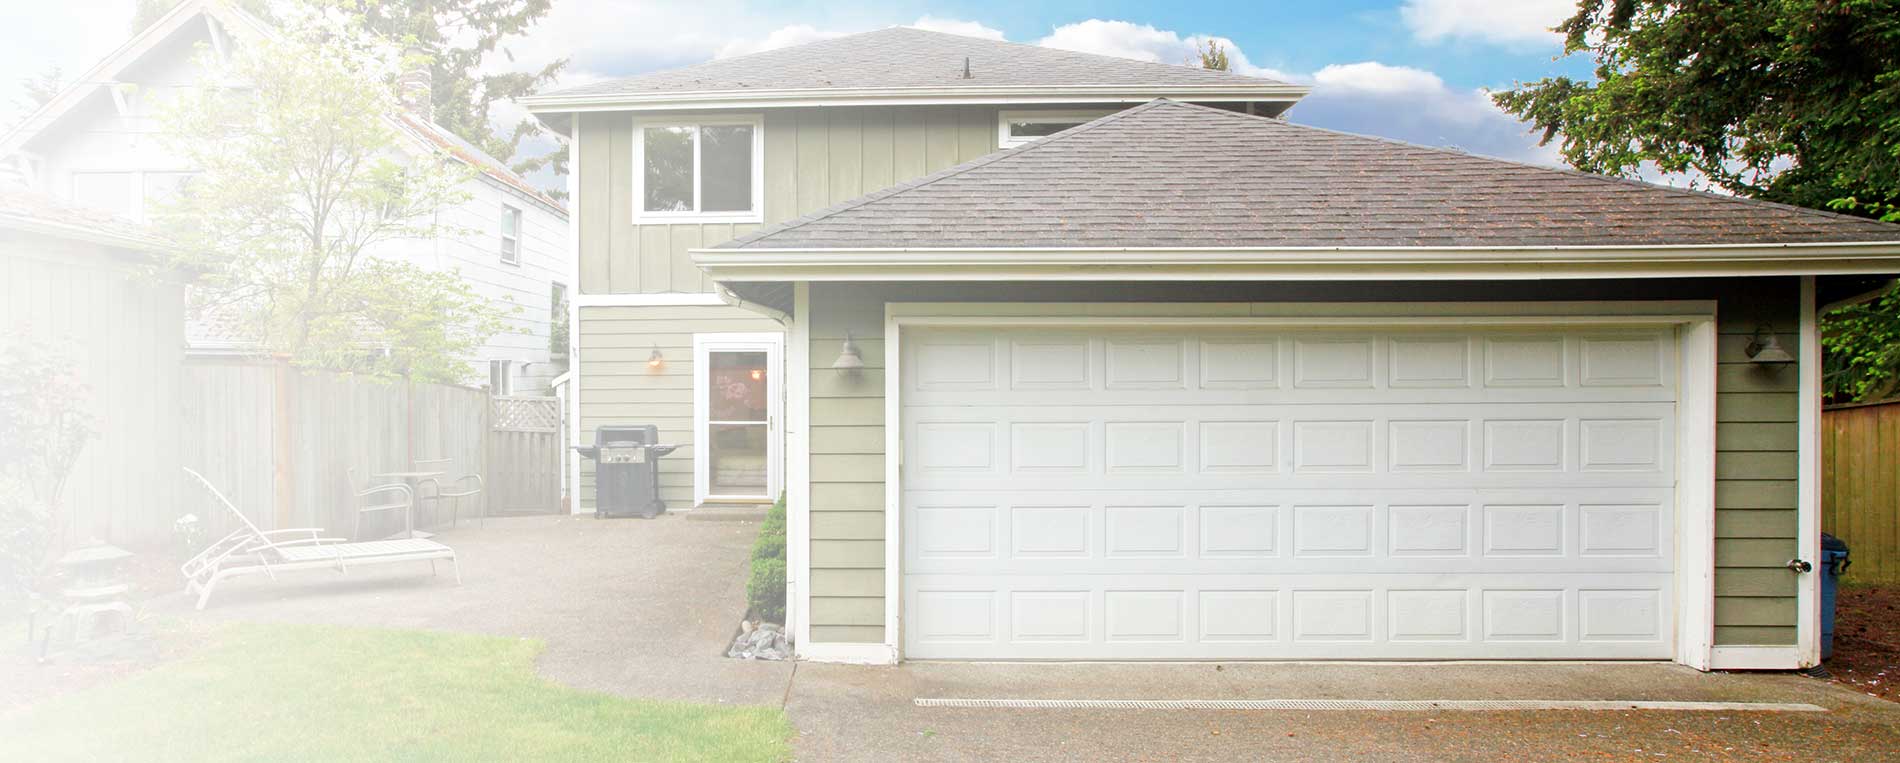 Cable Replacement For Garage Door In Yorkdale